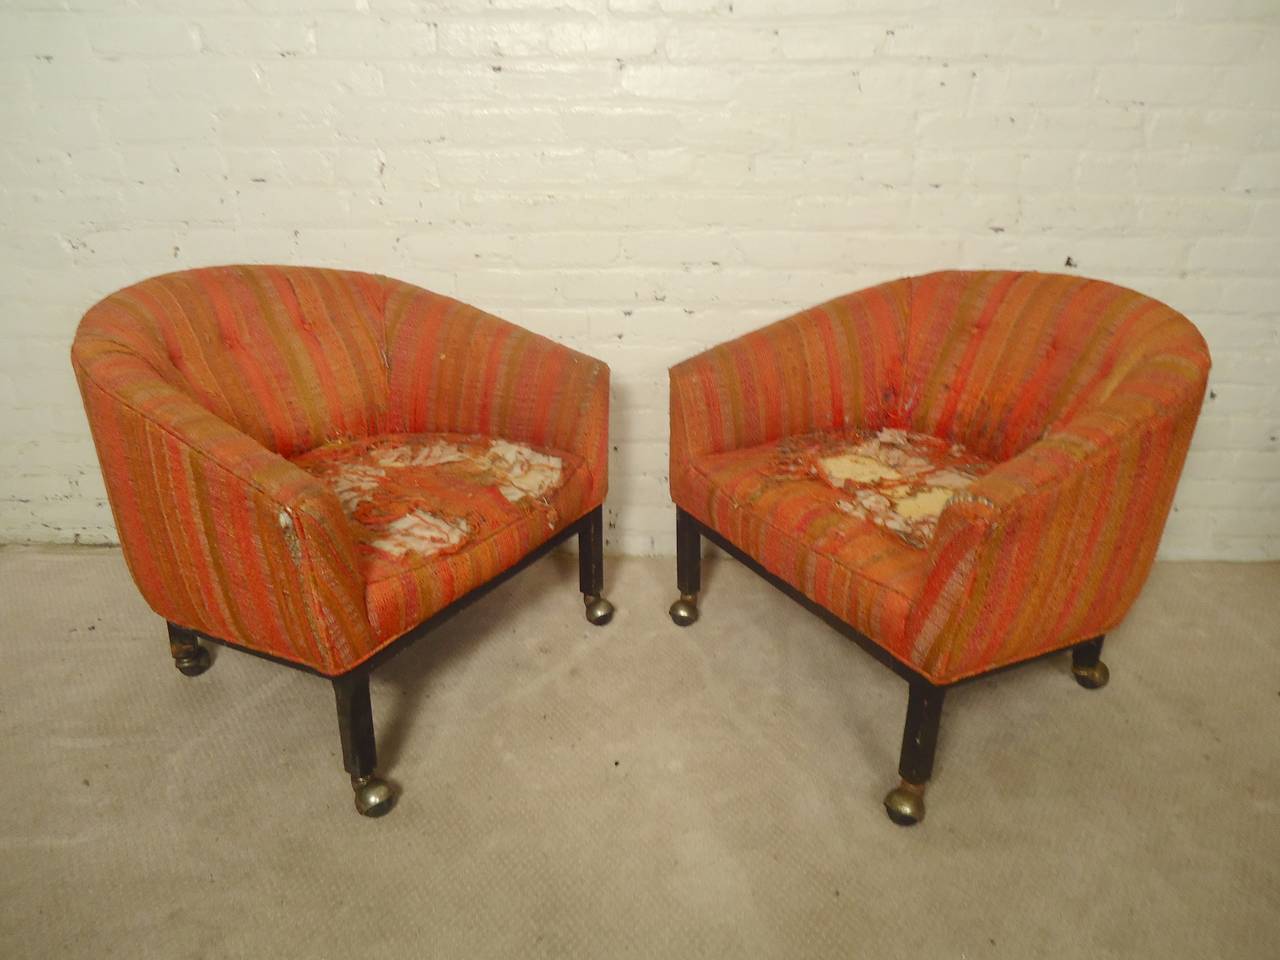 Elegant pair of vintage modern round back chairs on casters. Once recovered these will serve as beautiful lounge chairs with a black wood base.

(Please confirm item location - NY or NJ - with dealer)